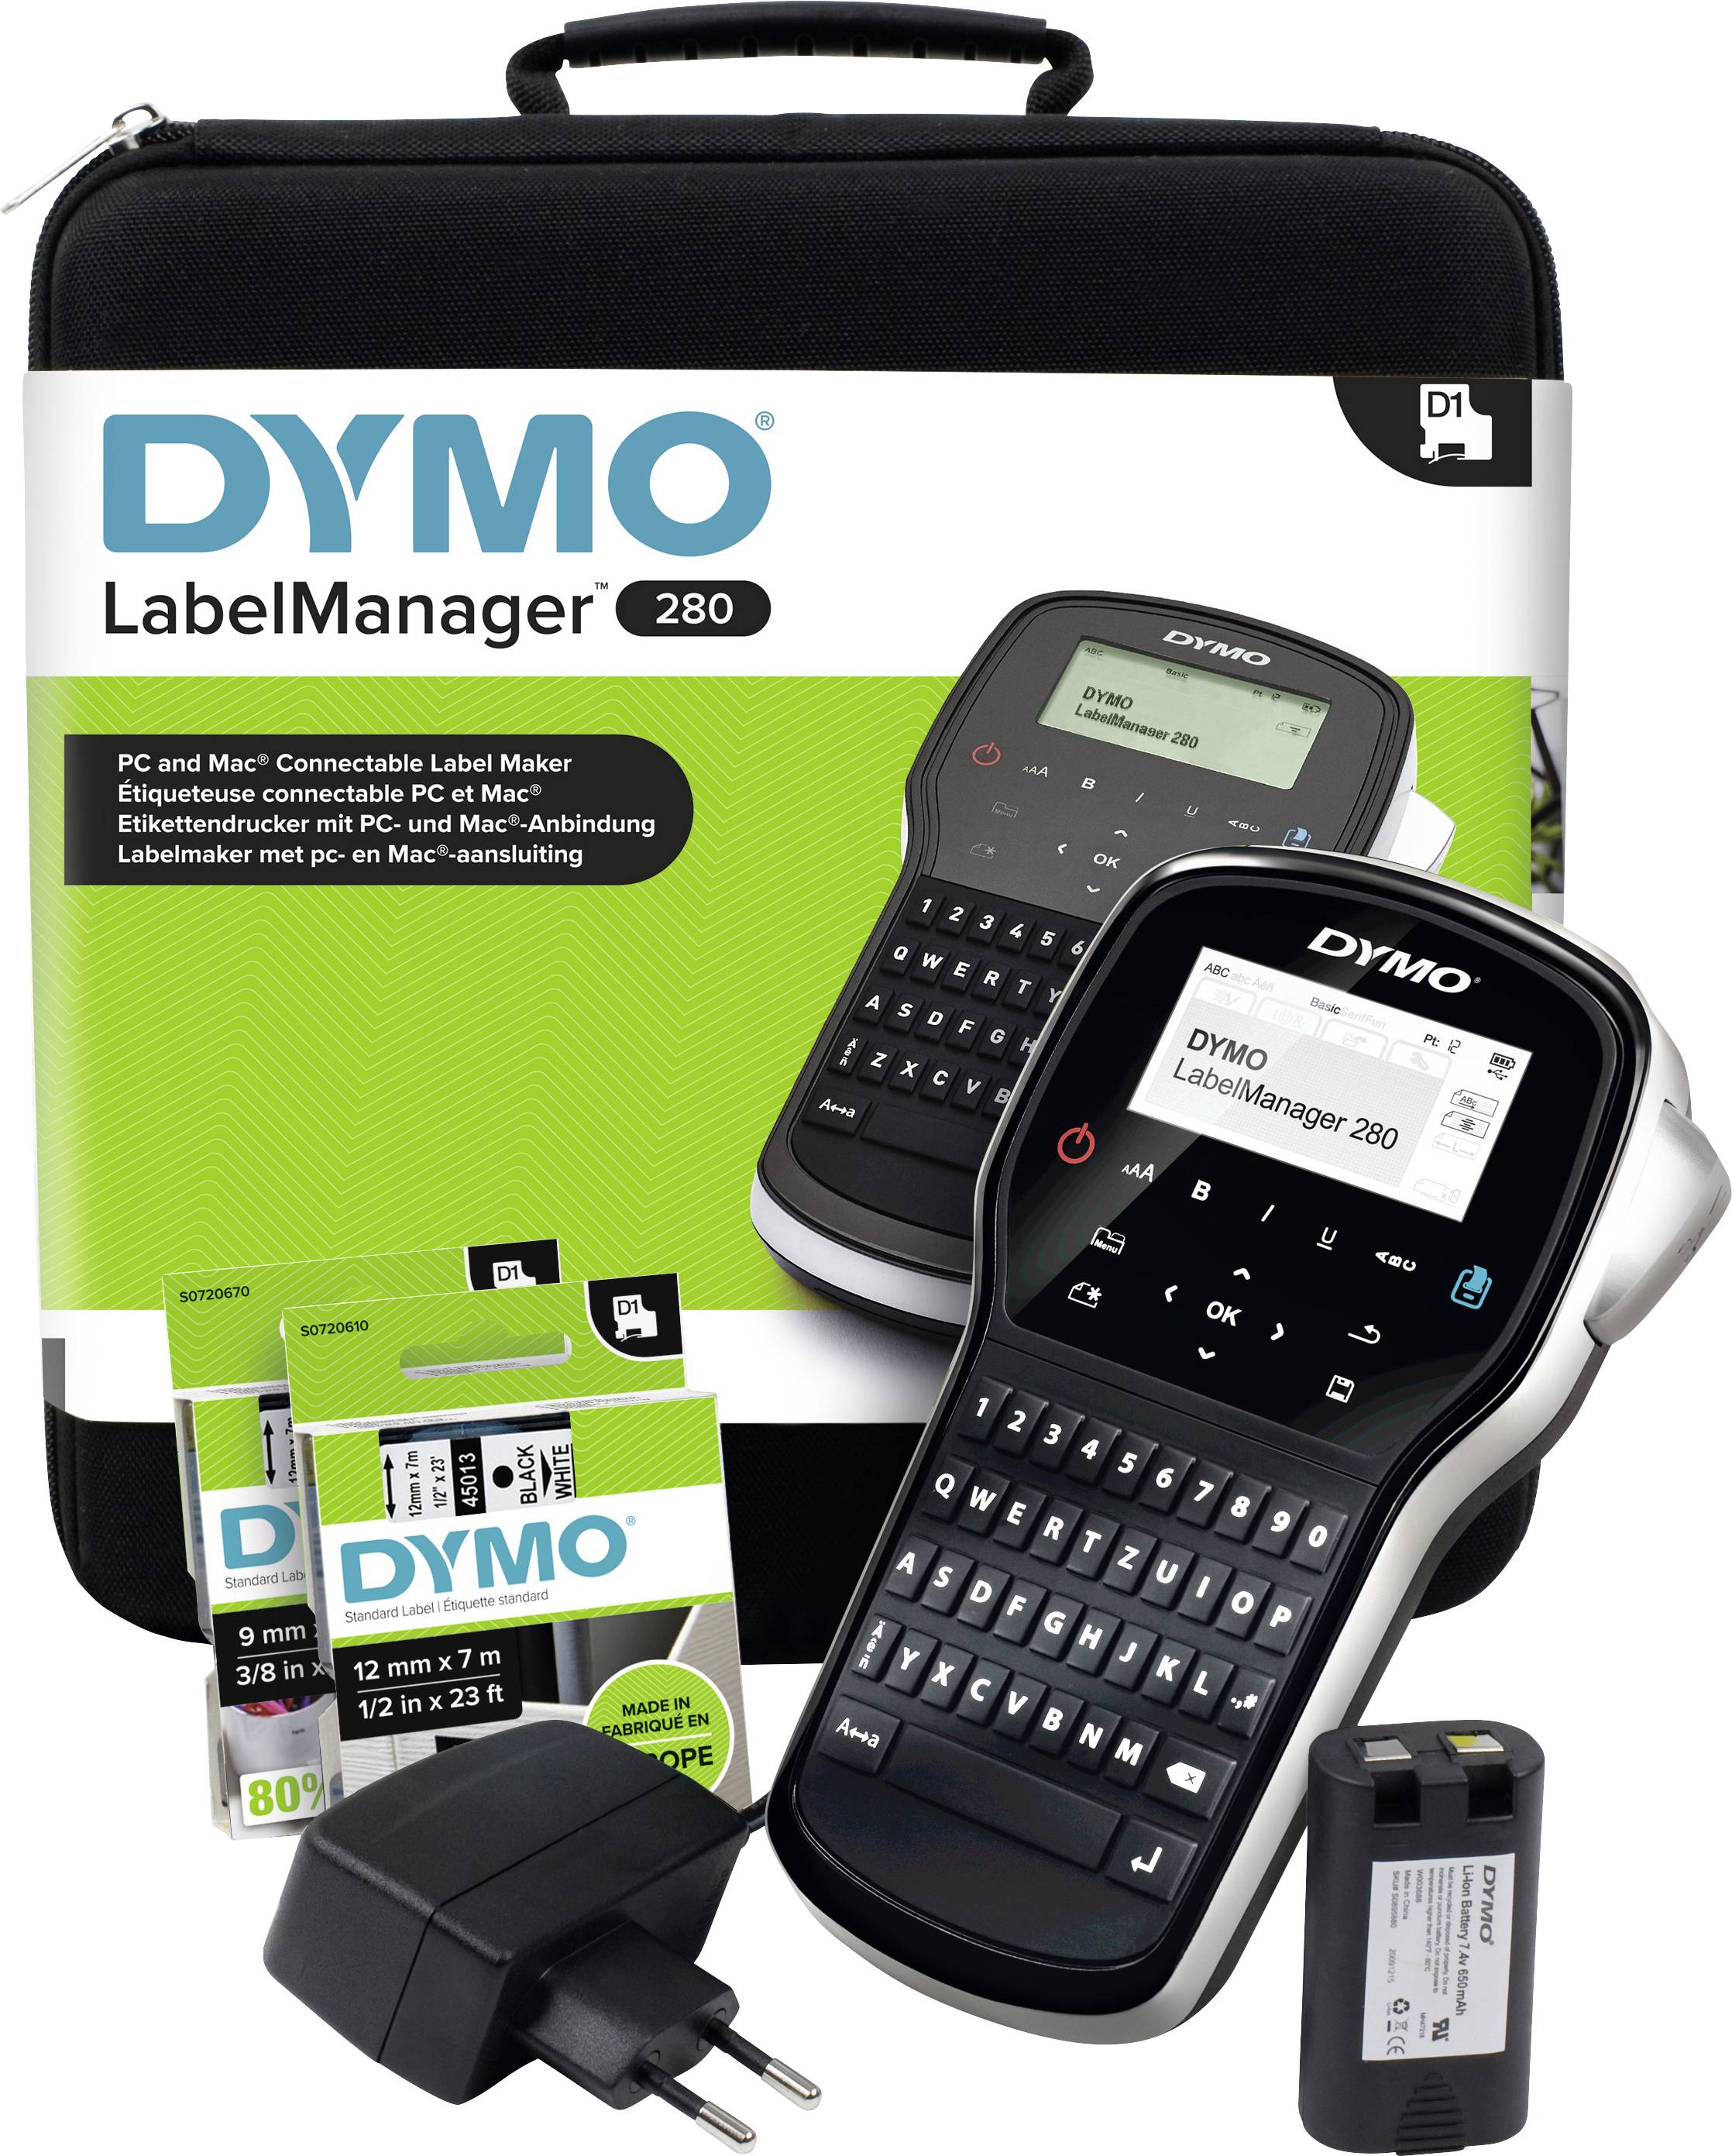 Dymo Labelmanager 280 Kit Label Printer Suitable For Scrolls D1 6 Mm